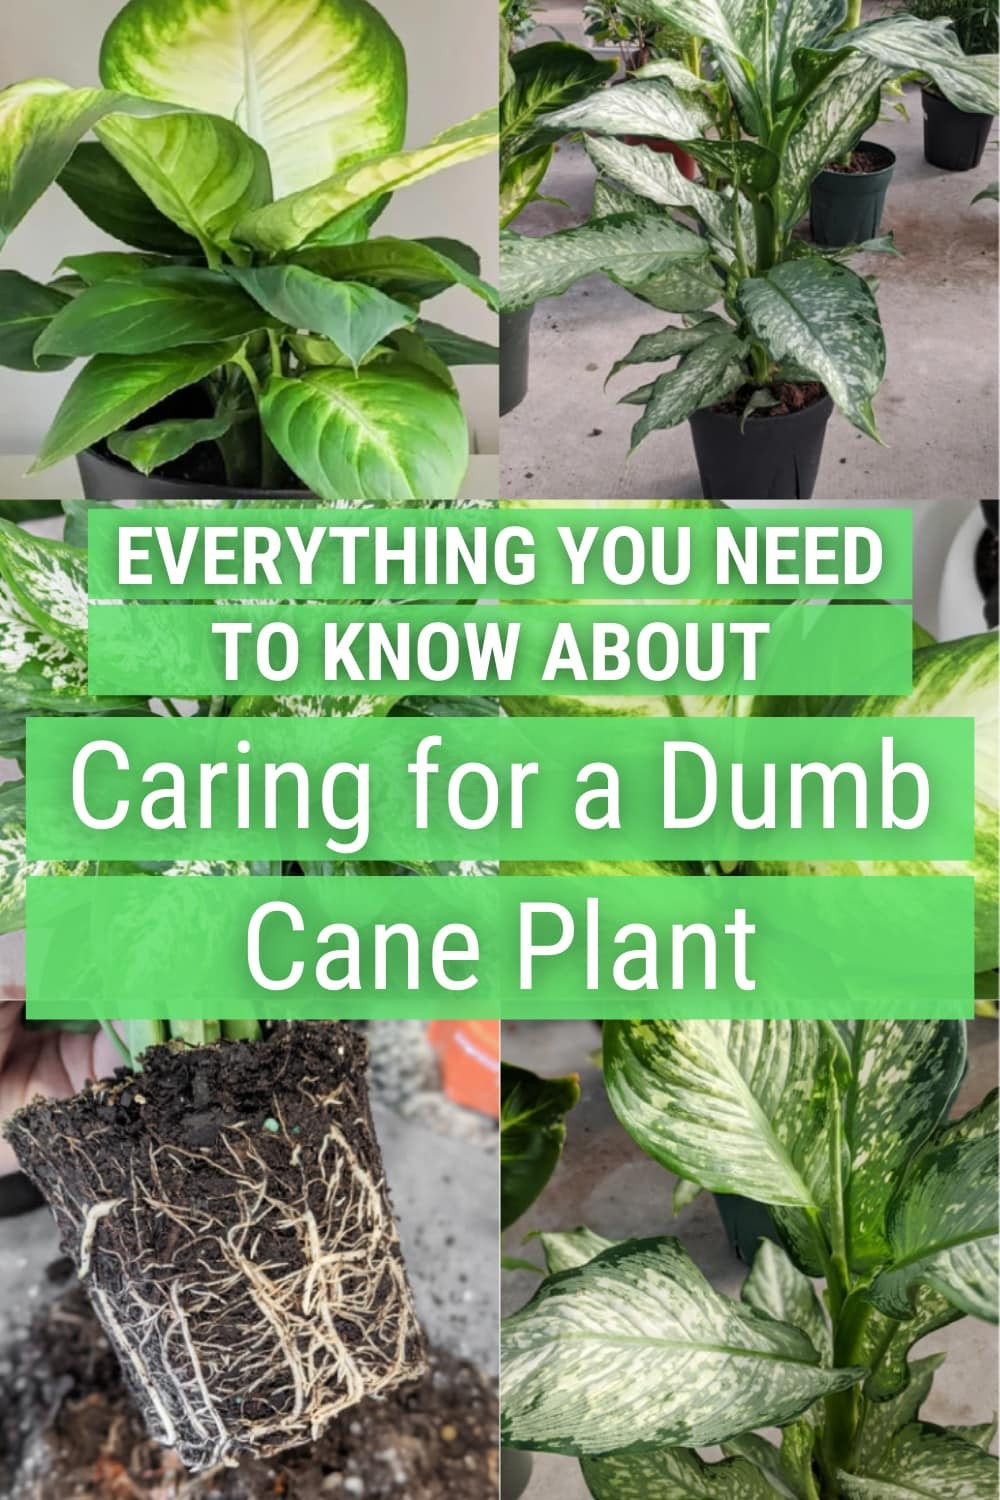 Dumb Cane Care: How To Care For Dieffenbachia Houseplants